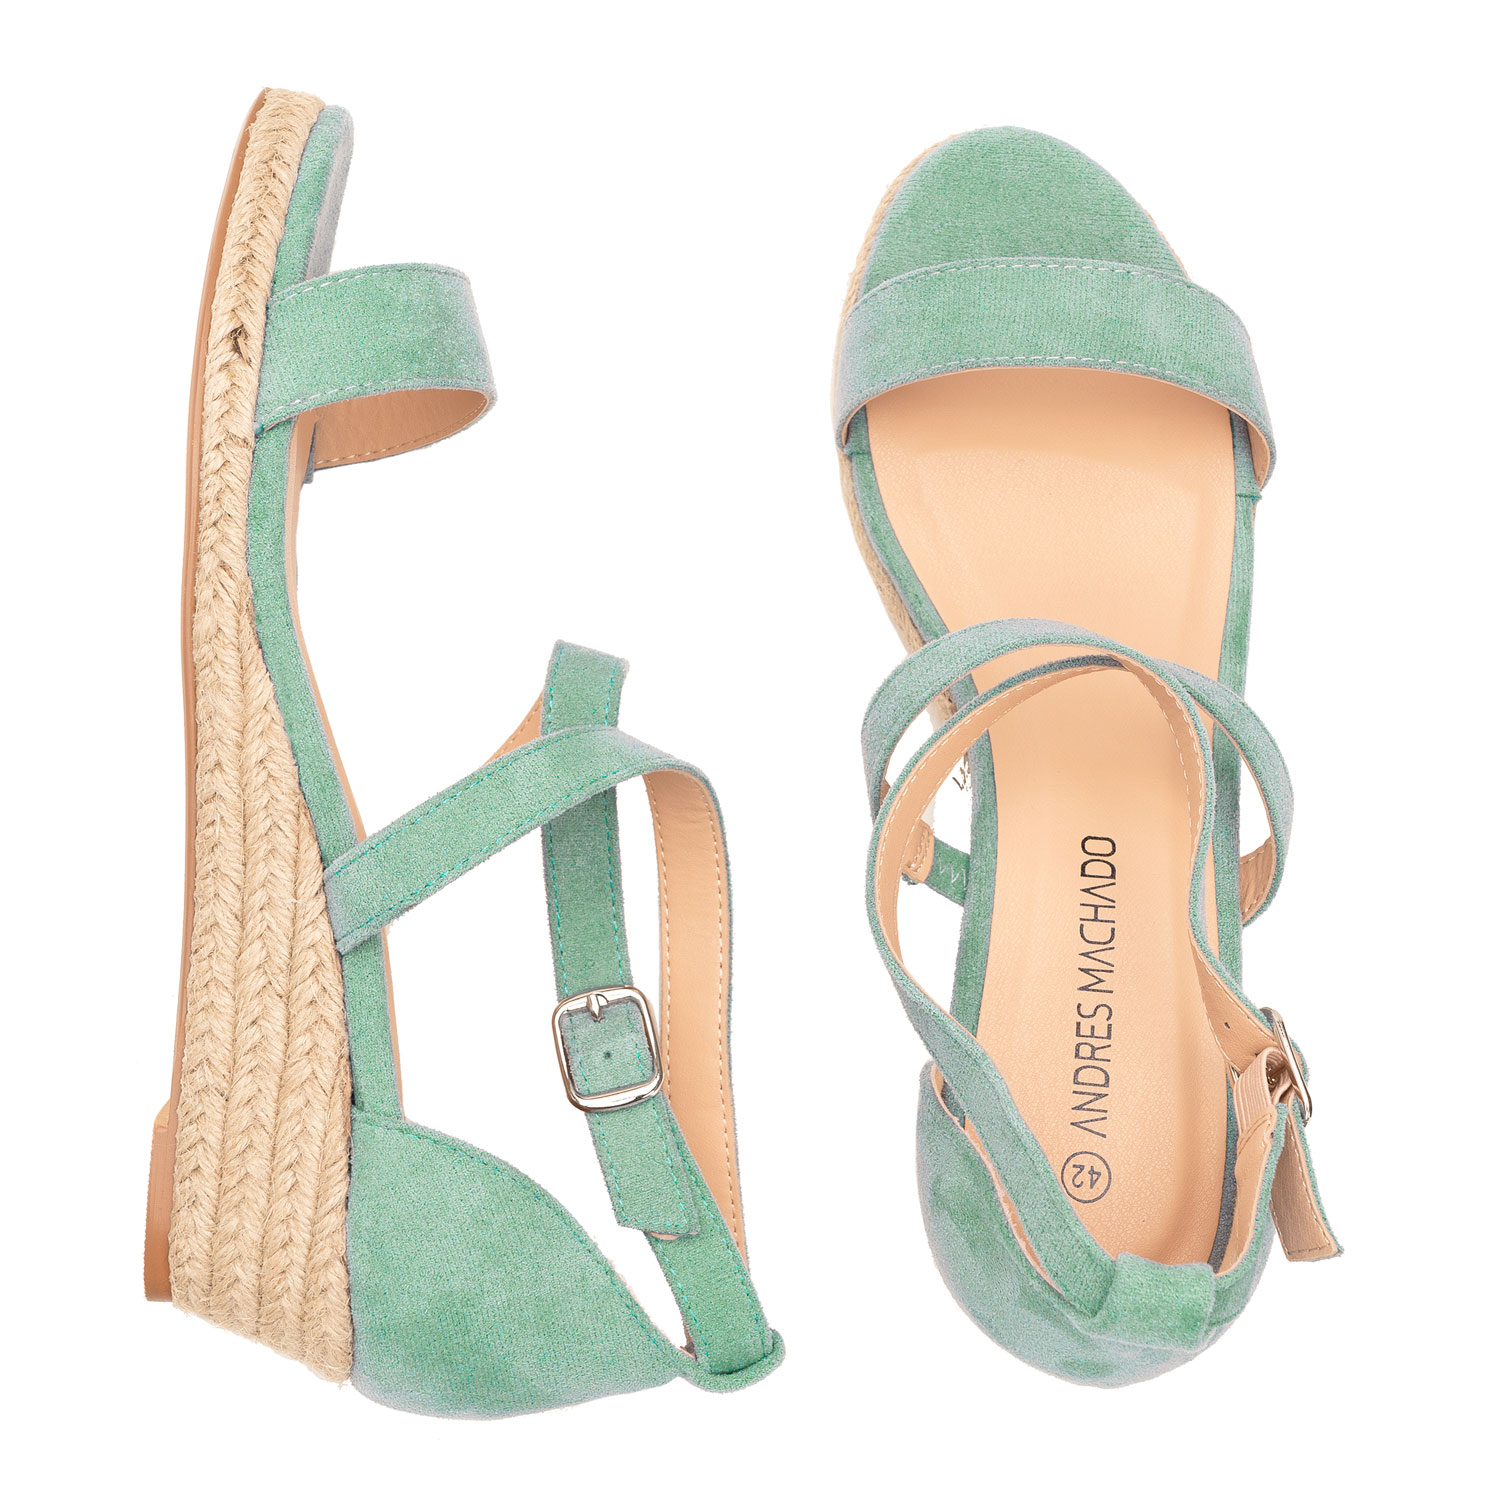 Mint Faux Suede Sandals with Jute Wedge 